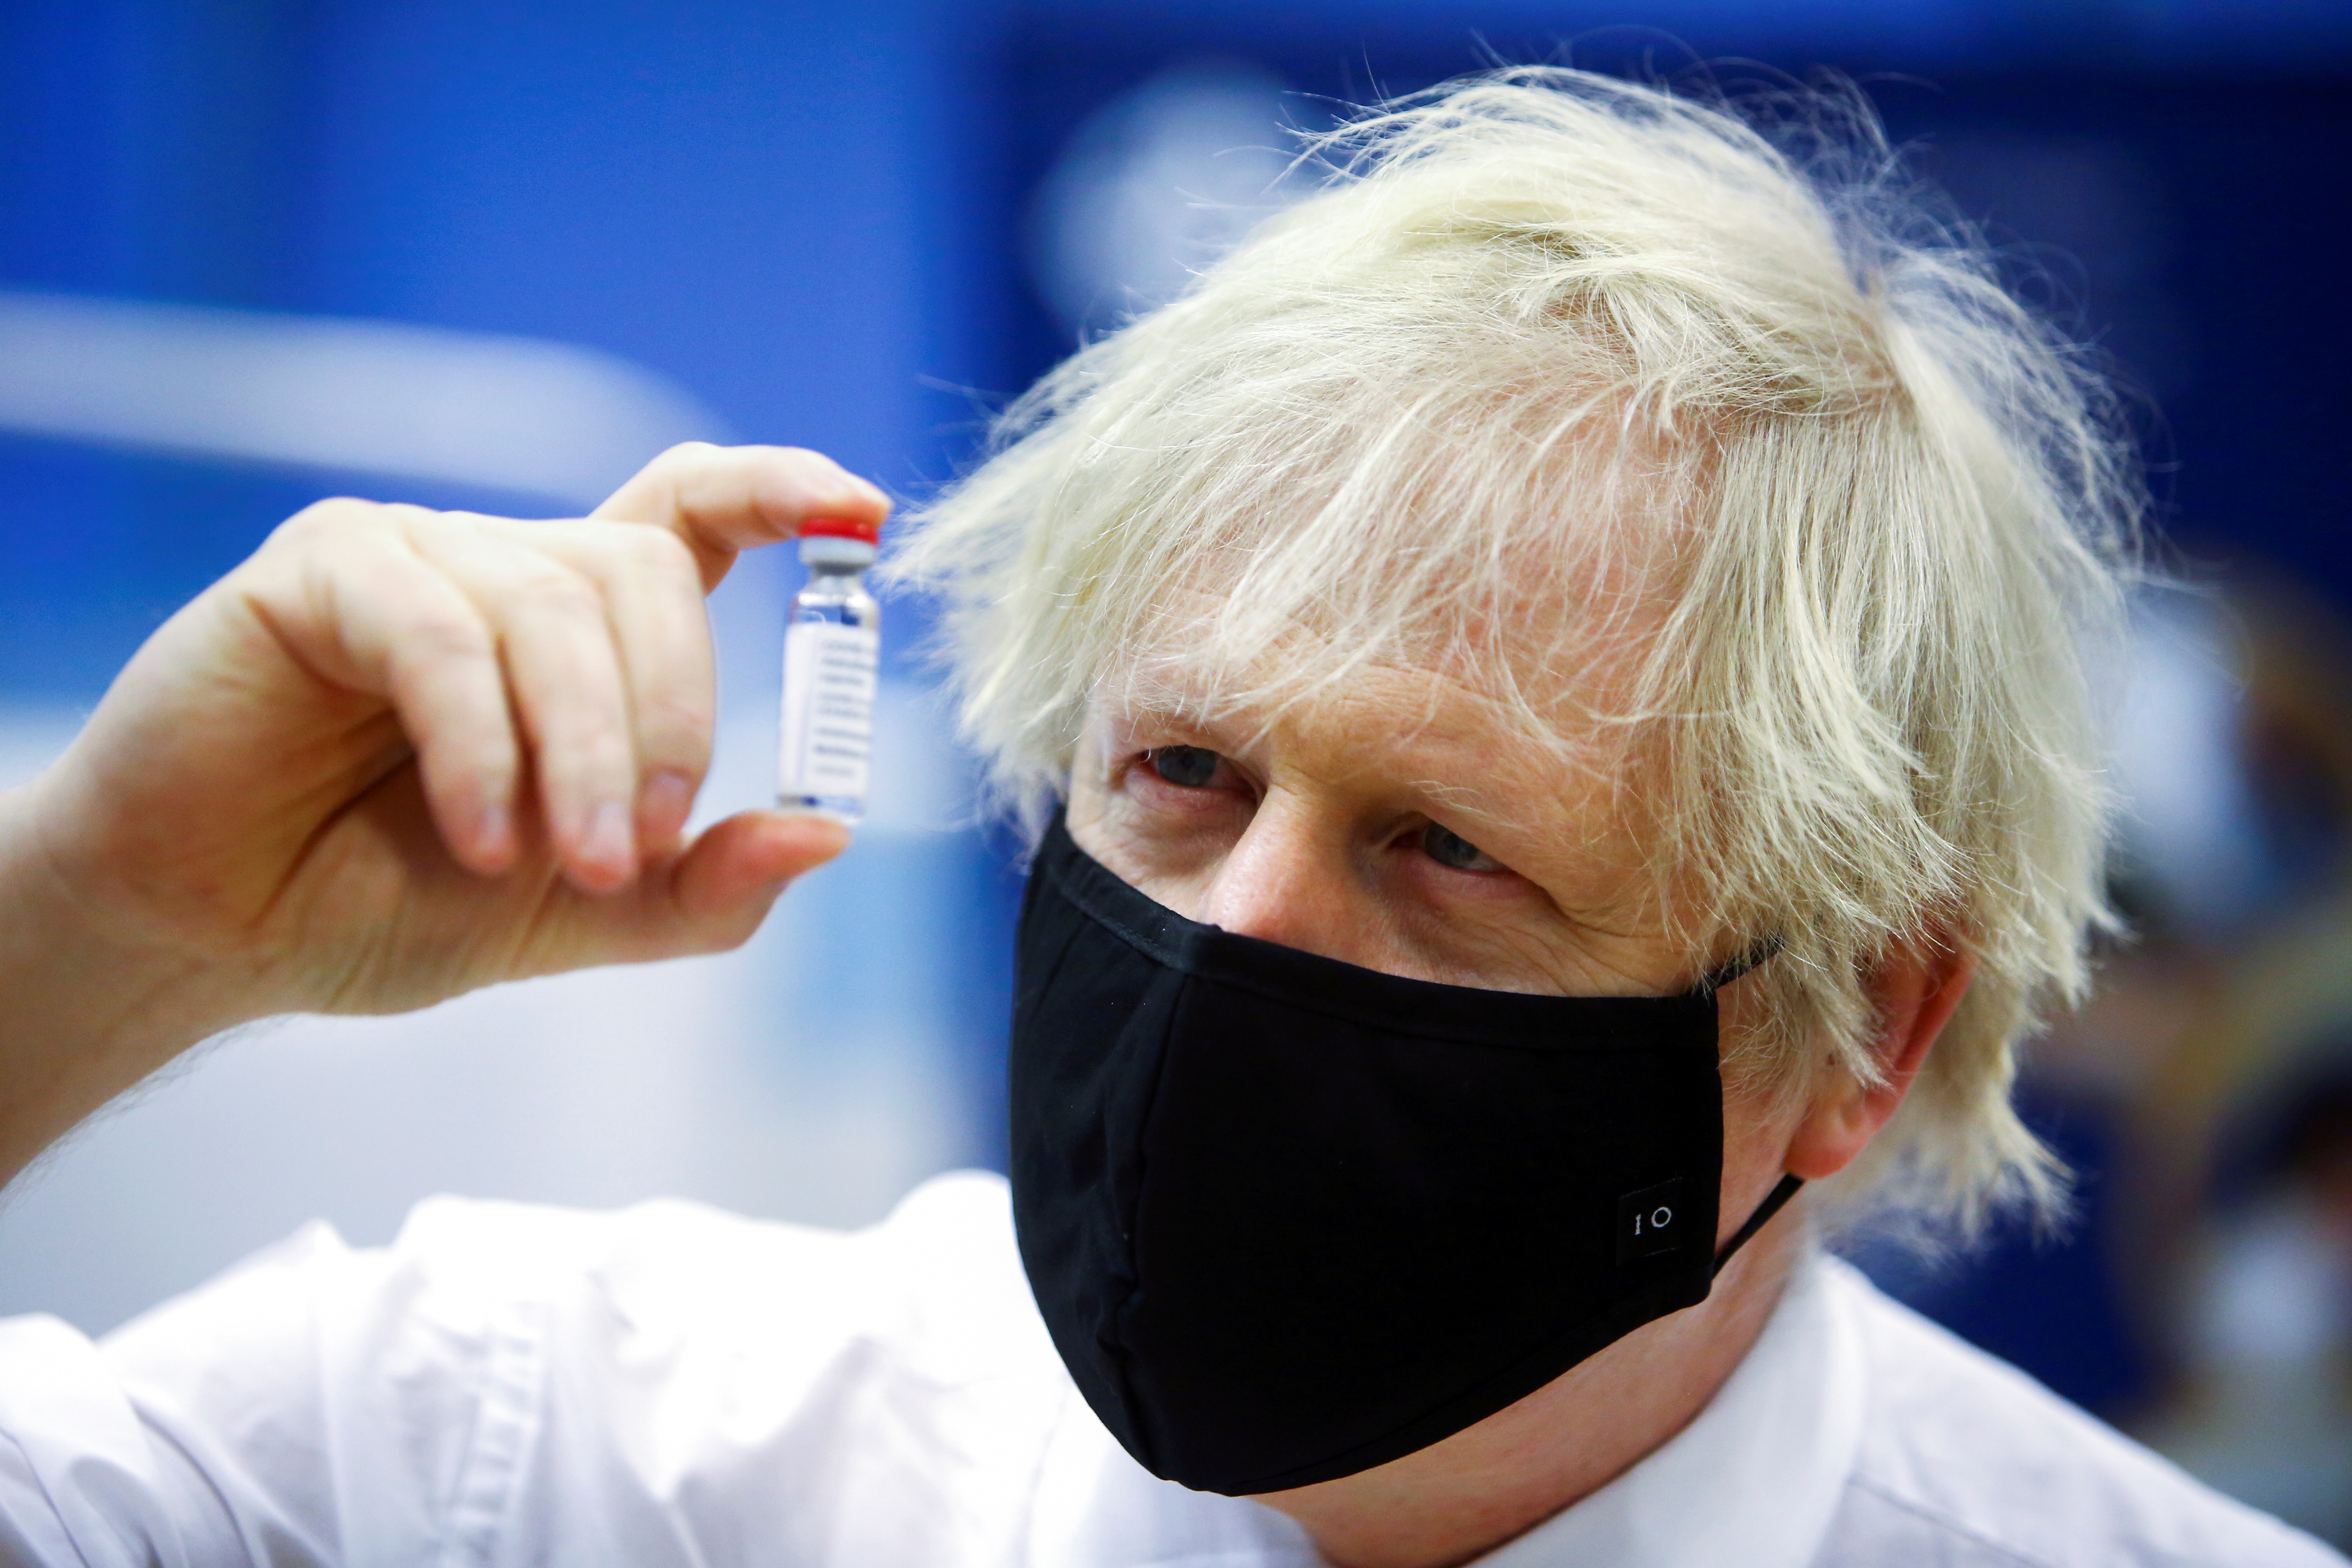 Britain's Prime Minister Boris Johnson holds a vial of an Oxford-AstraZeneca COVID-19 vaccine, during his visit at a vaccination centre at Cwmbran Stadium in Cwmbran, south Wales, Britain February 17, 2021. Geoff Caddick/Pool via REUTERS